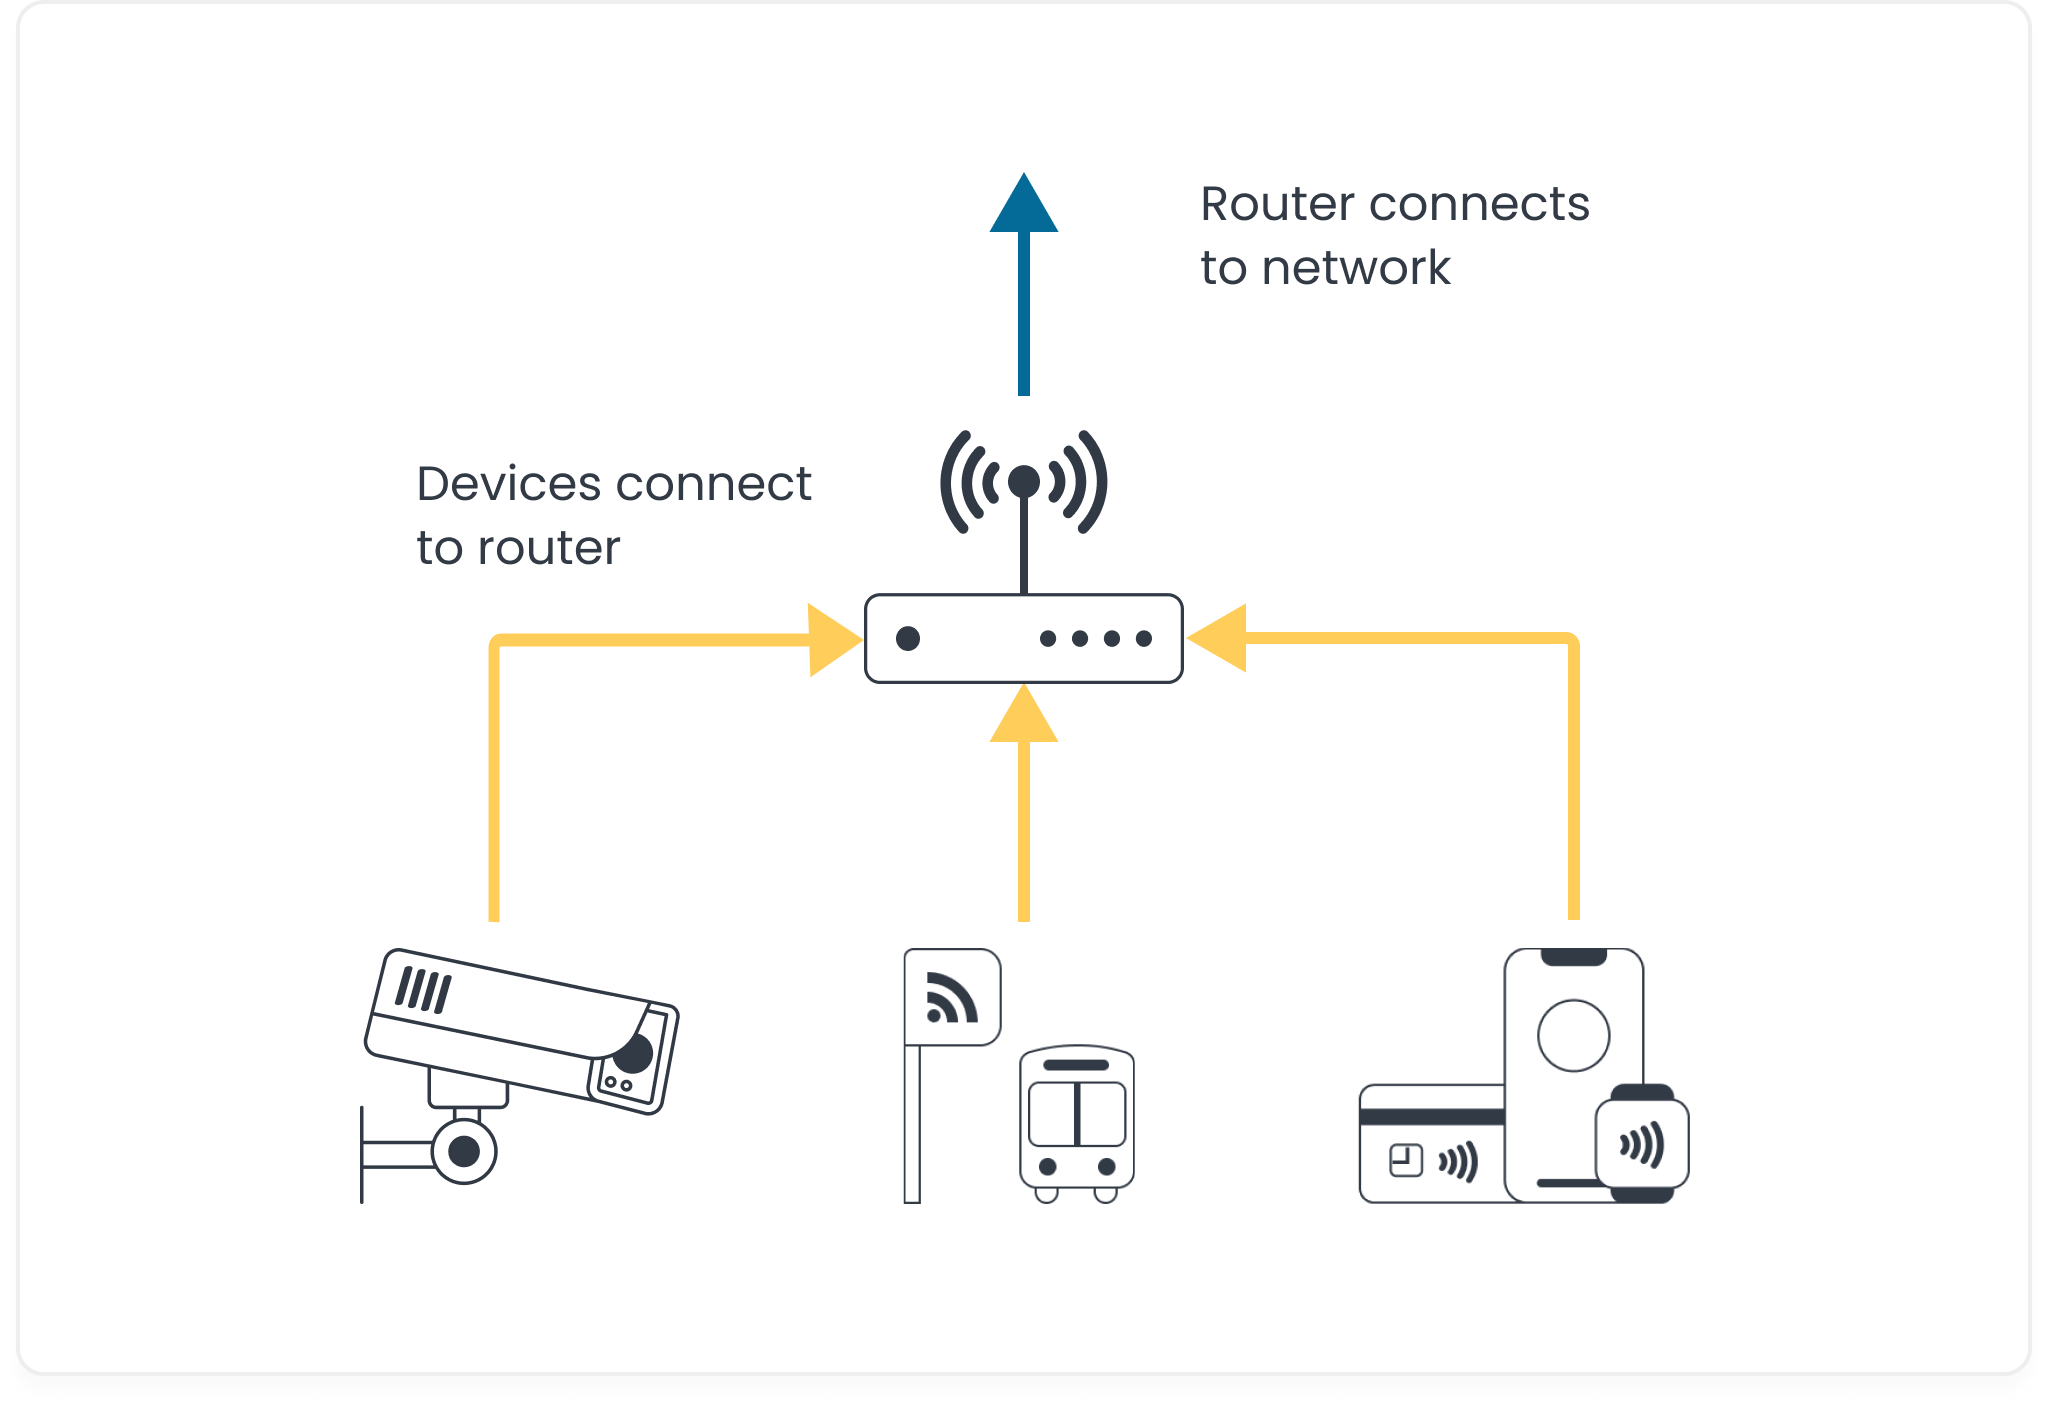 Router connects to network. Devices connect to router.